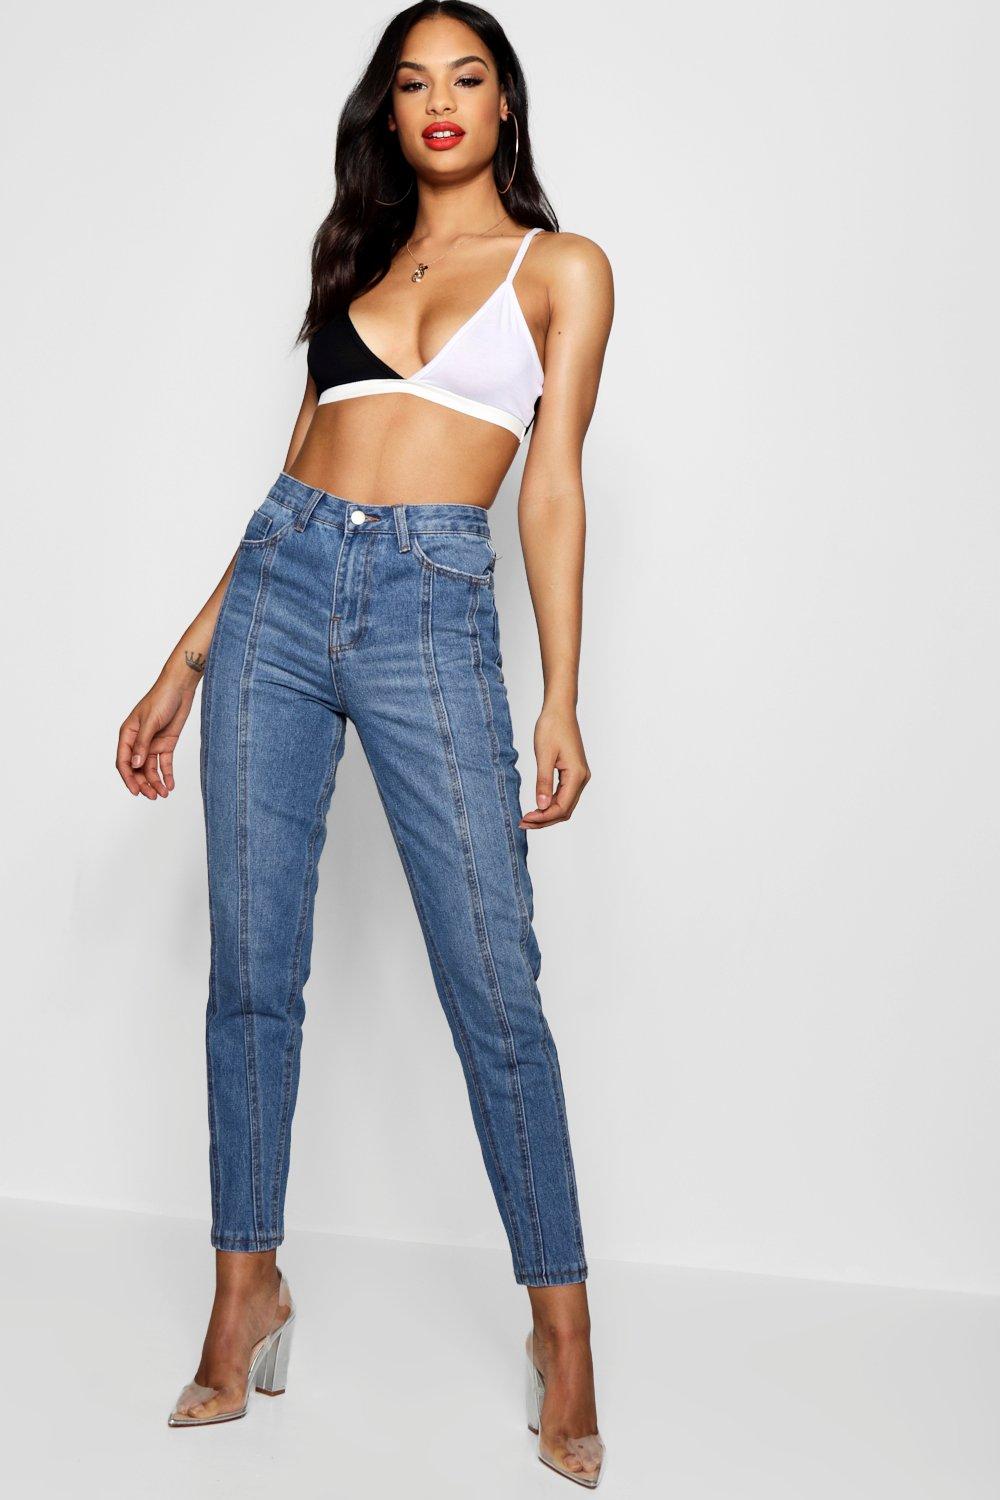 This website has some of the best cute cheap jeans!